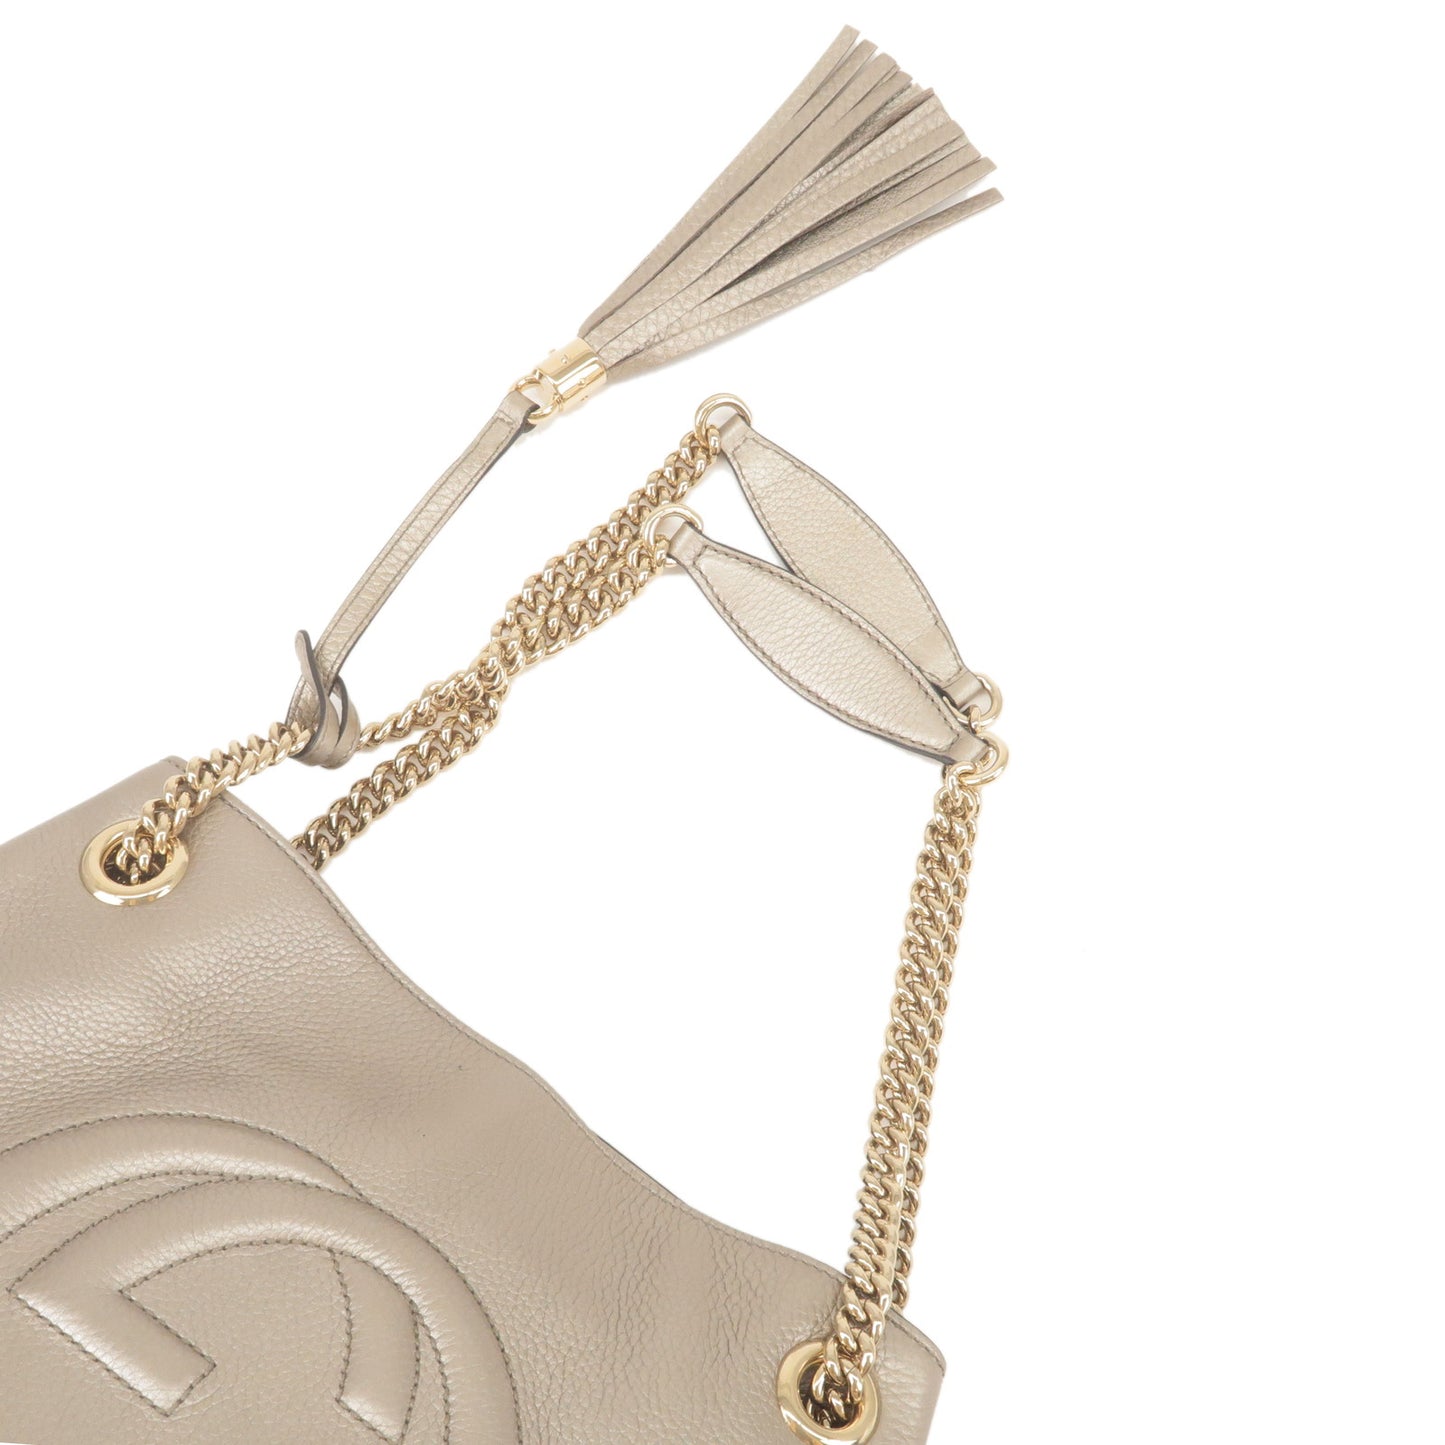 GUCCI SOHO Leather Chain Shoulder Bag Champagne Gold 308982